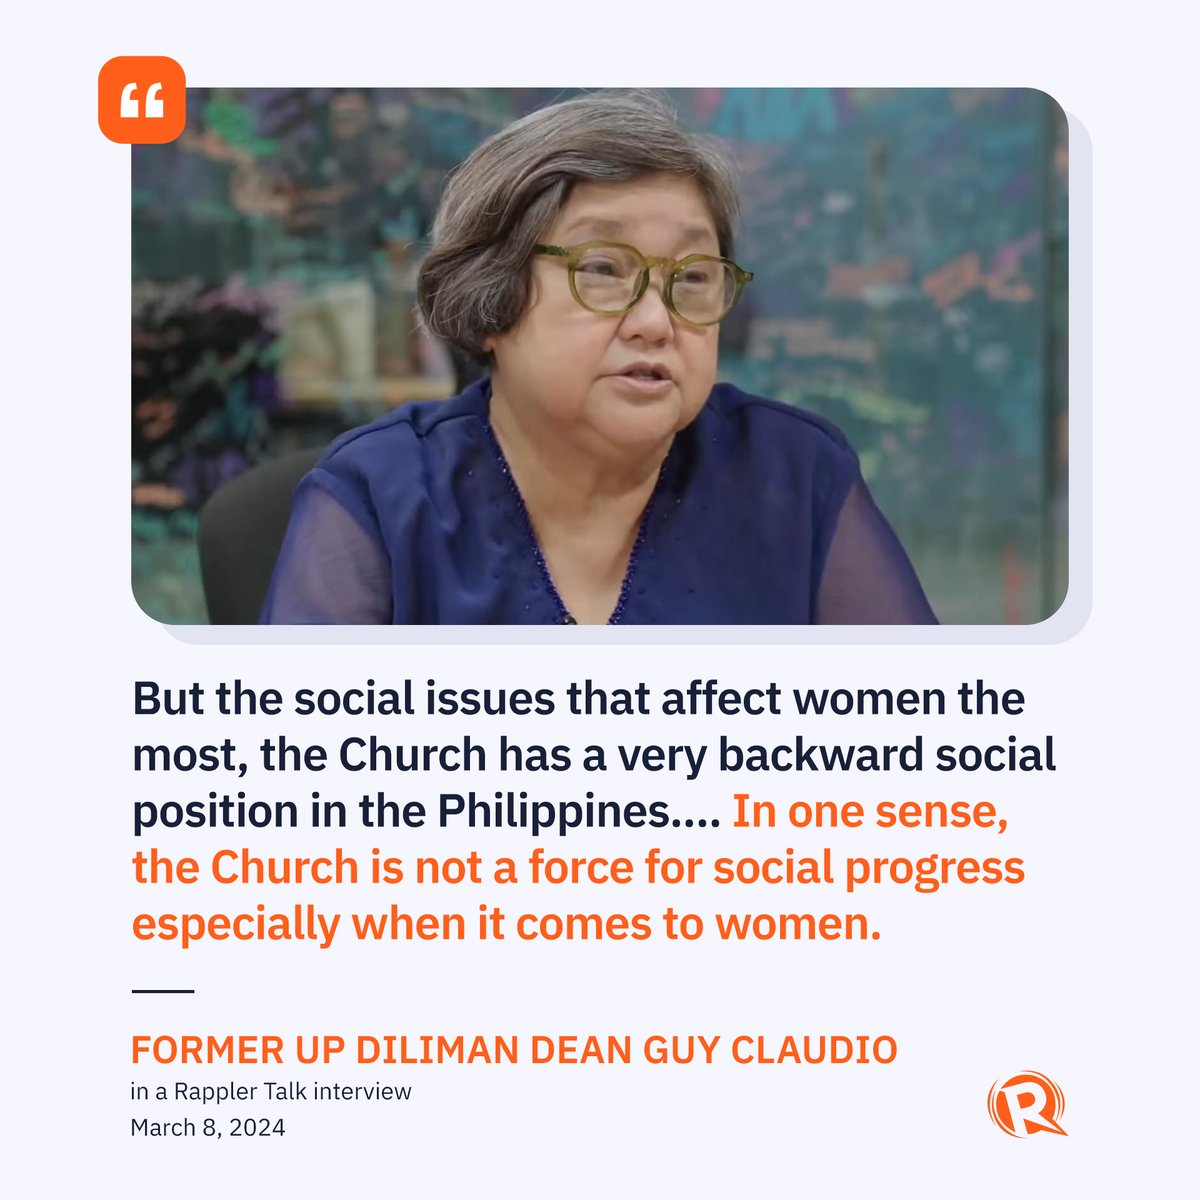 Guy Claudio, former dean of the University of the Philippines Diliman College of Social Work & Community Development, said in a Rappler Talk interview that the Catholic Church is an 'anti-democratic force' in how it influences public policy, especially on women's rights.…